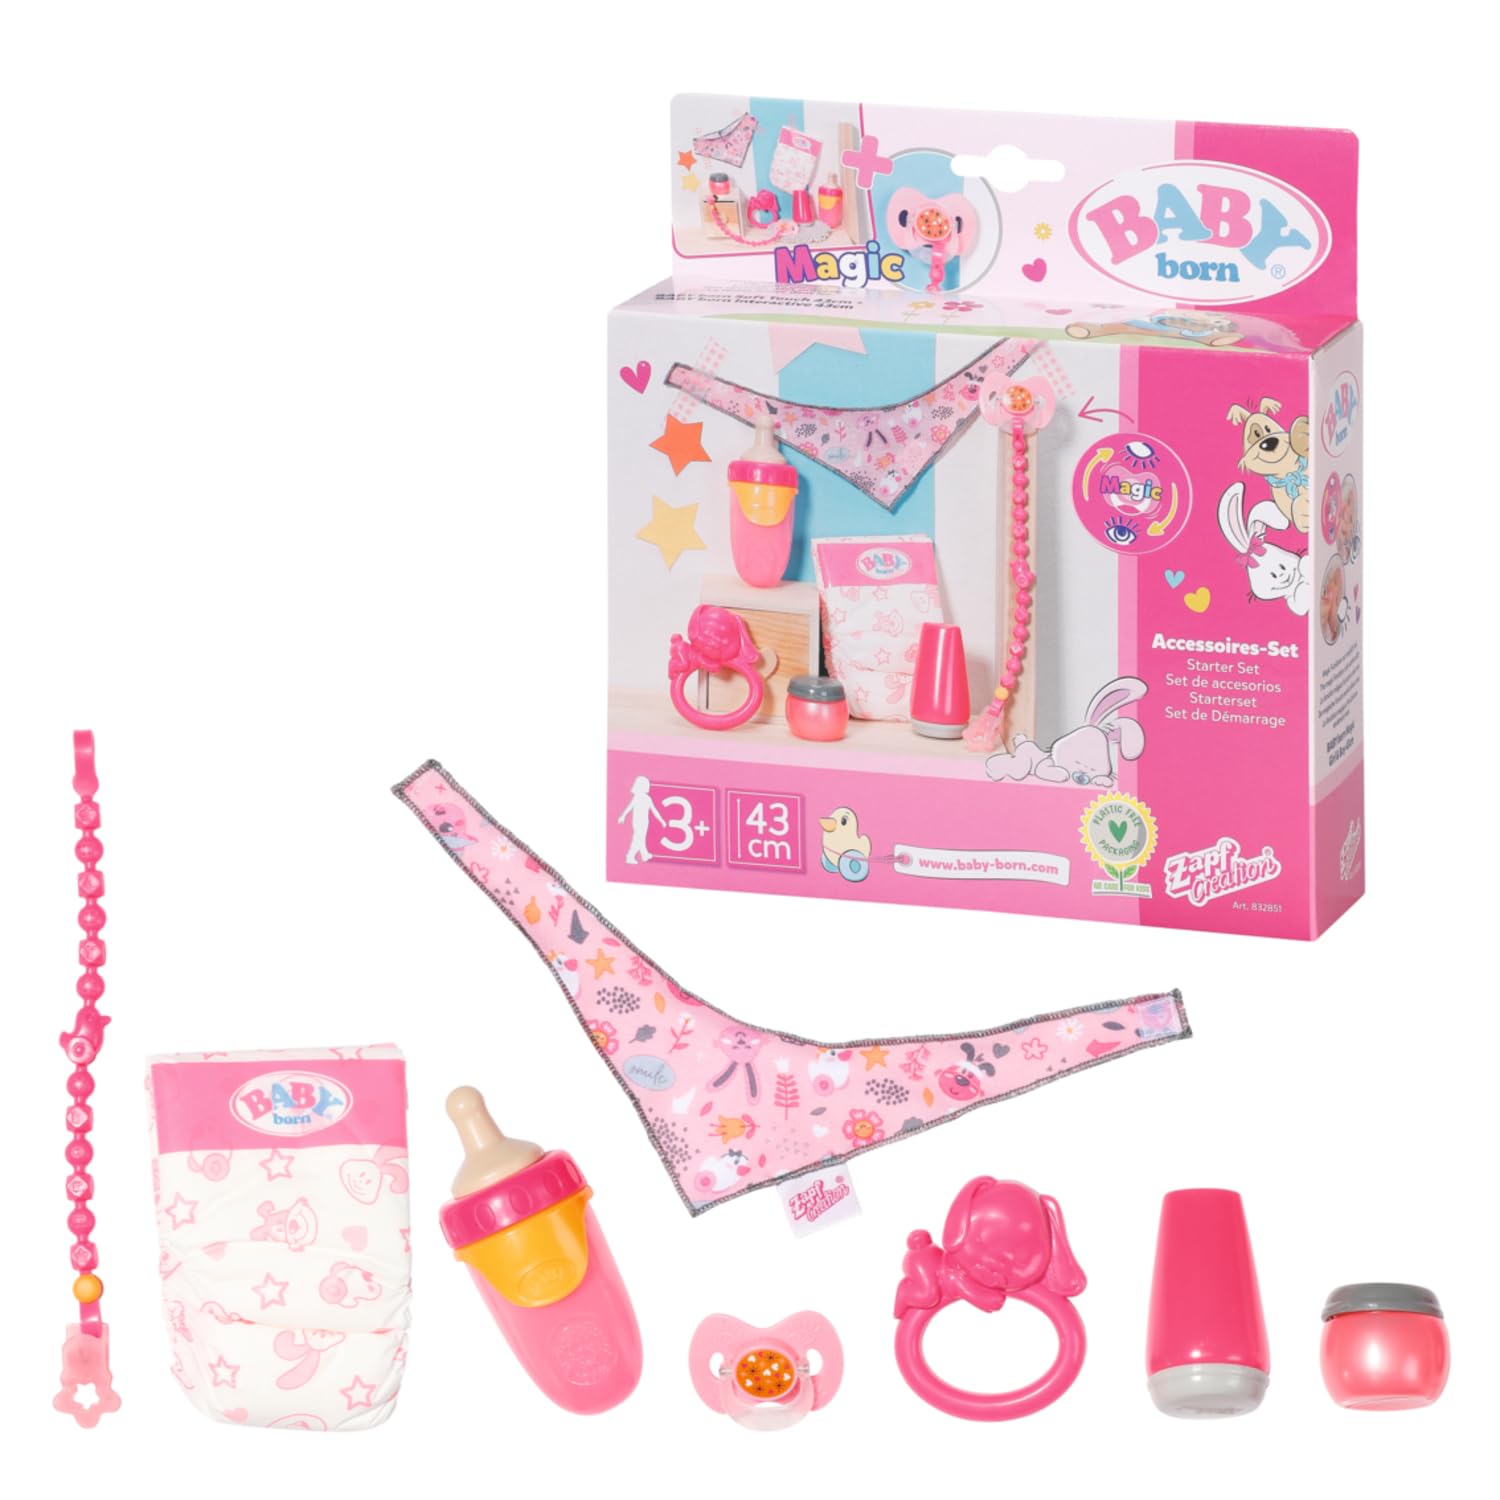 BABY born Starter Set 832851 - Accesories Dolls for Toddlers - Includes Magic Eyes Dummy & Dummy Chain, Nappy, Ring Toy, Powder Bottle, Cream Tube, Bottle & Neckerchief